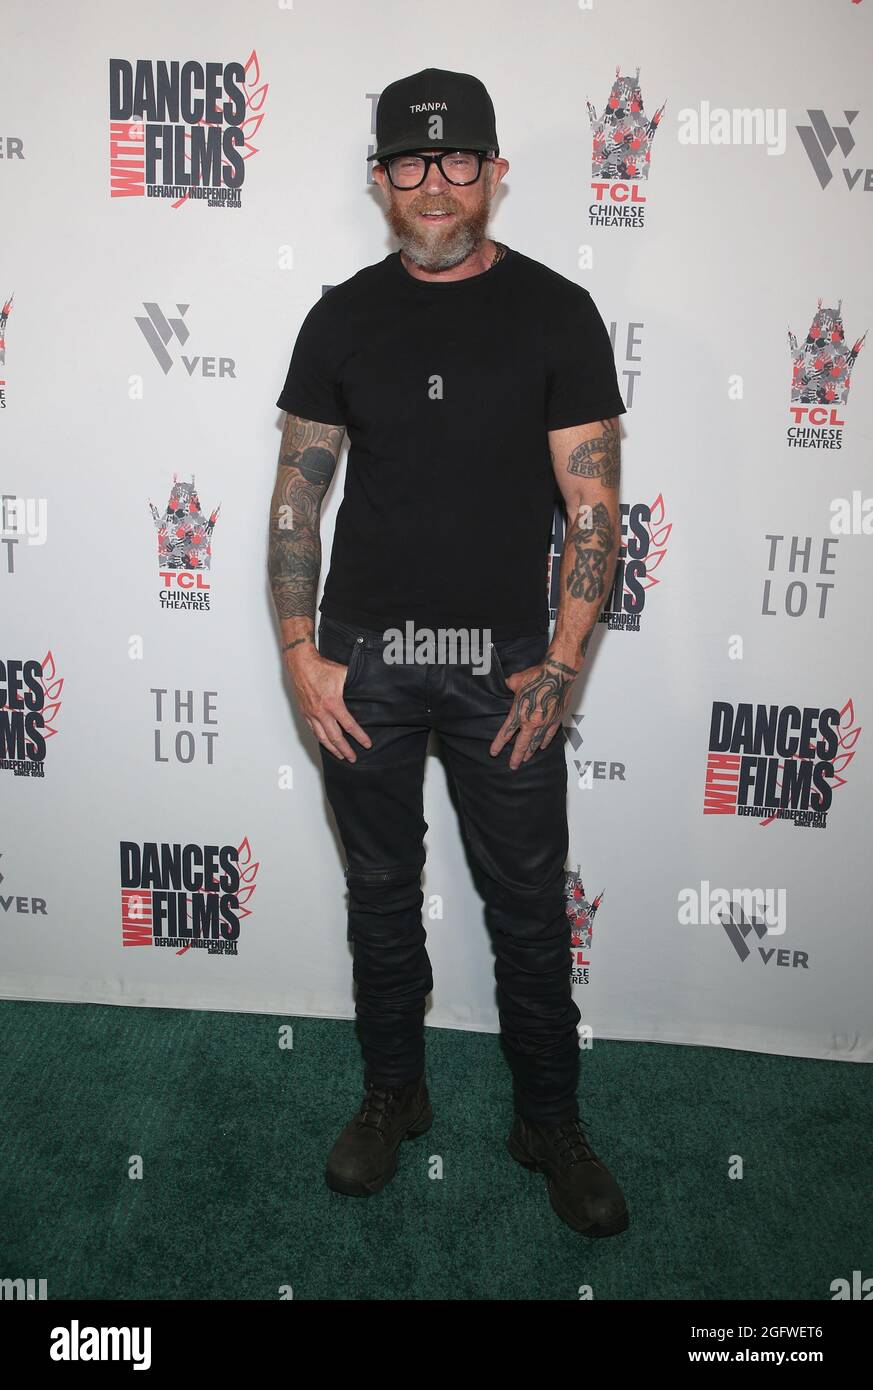 Hollywood, Ca. 26th Aug, 2021. Buck Angel at The Art Of Protest at 24th Annual Dances With Films Film Festival on August 26, 2021 at the TCL Chinese Theatre in Hollywood, California. Credit: Faye Sadou/Media Punch/Alamy Live News Stock Photo